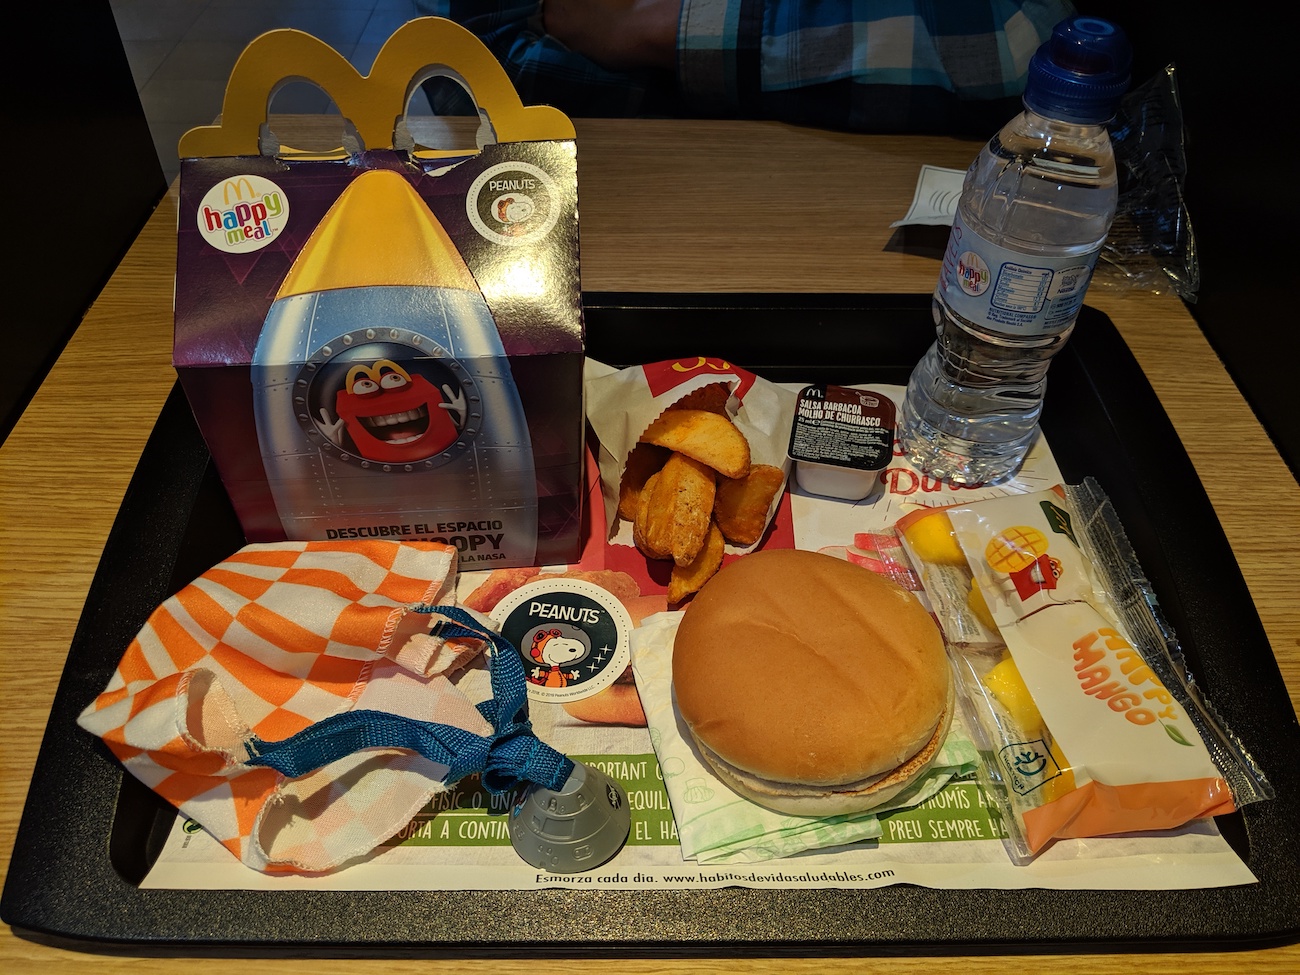 McDonalds Happy Meal from Barcelona Spain 2019